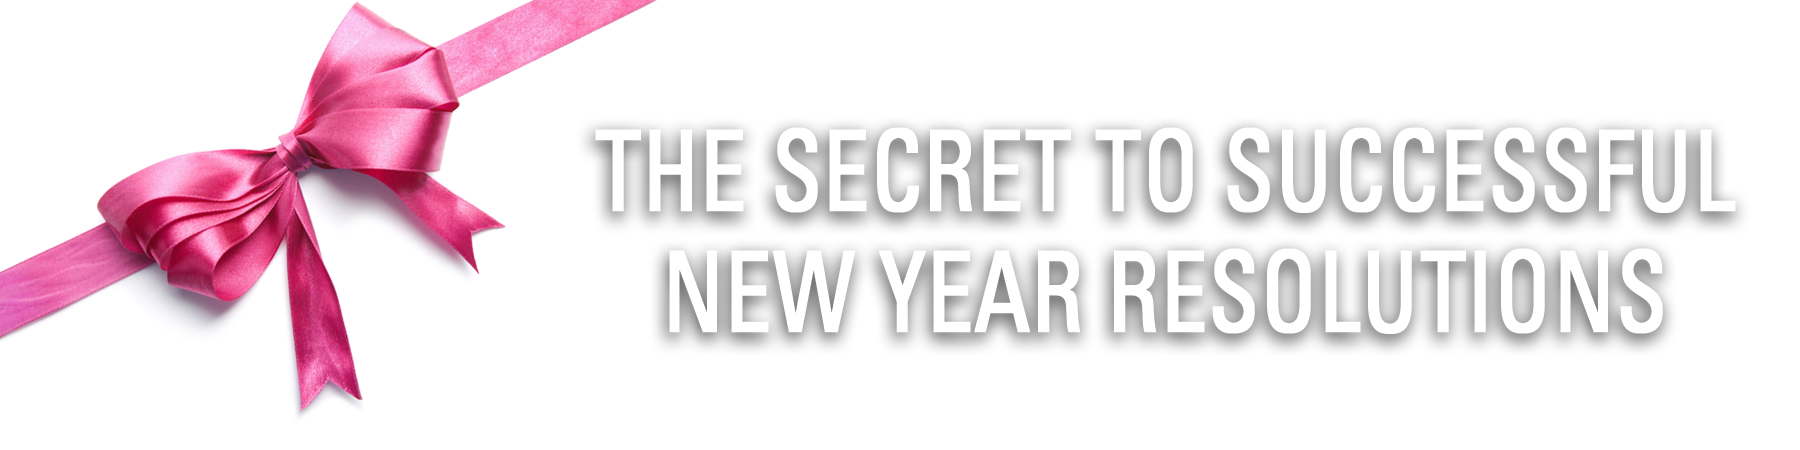 The Secret To Successful New Year Resolutions